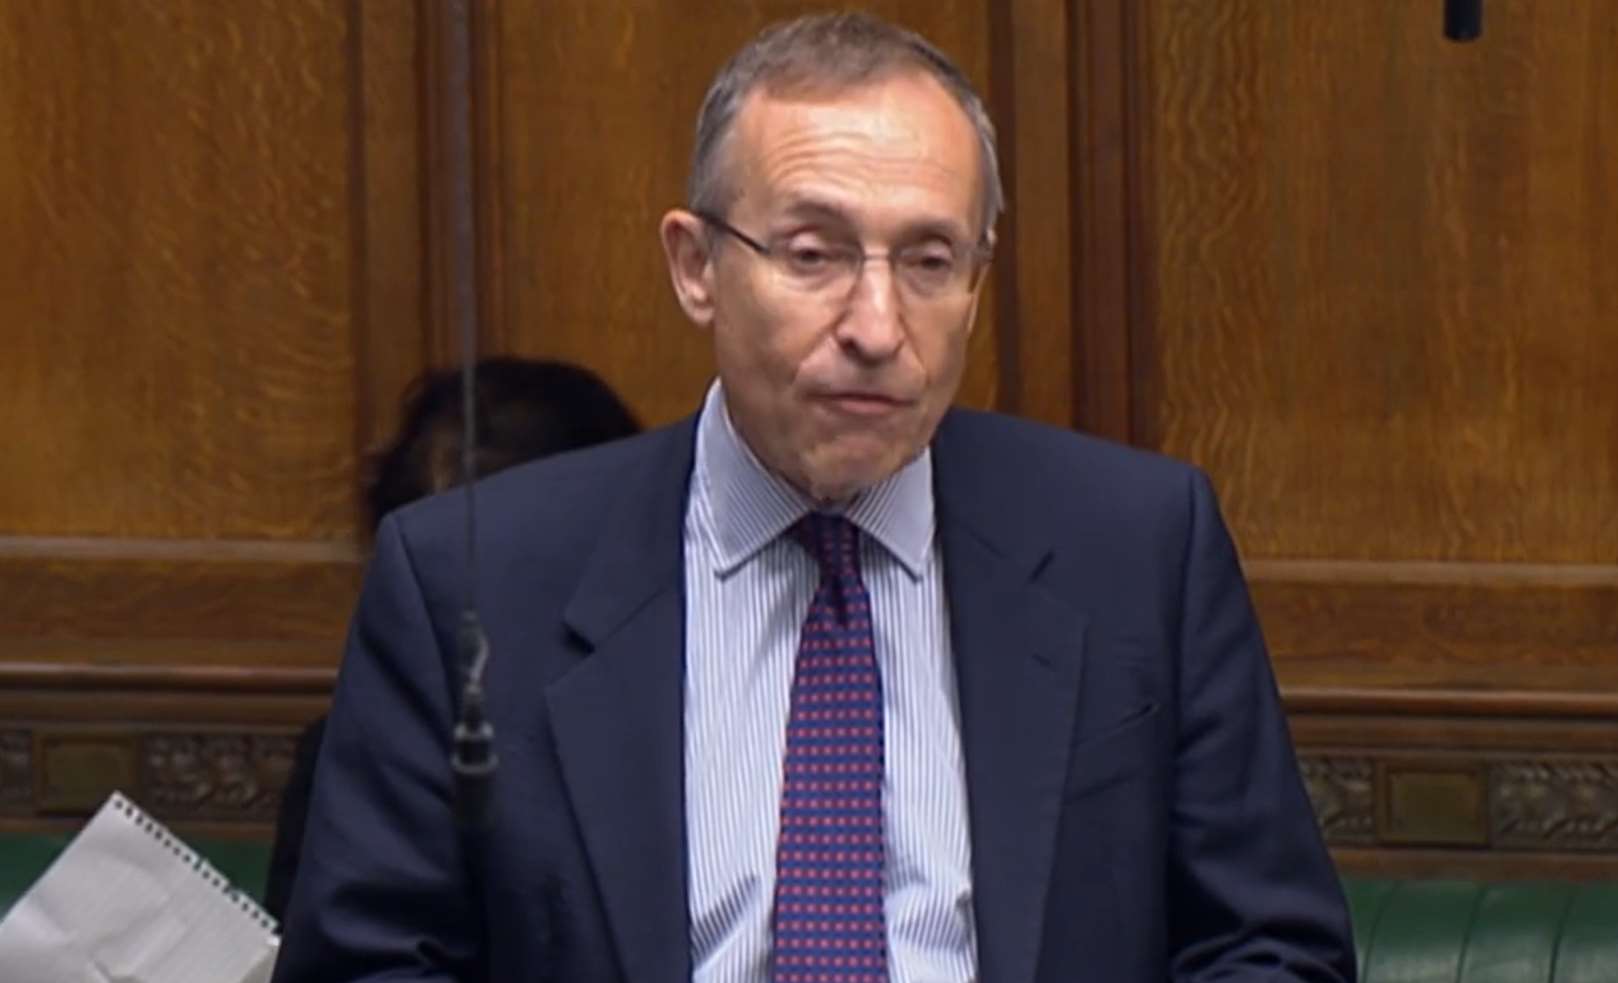 Labour MP Andy Slaughter speaking in the House of Commons (UK Parliament/Parliament TV/PA)